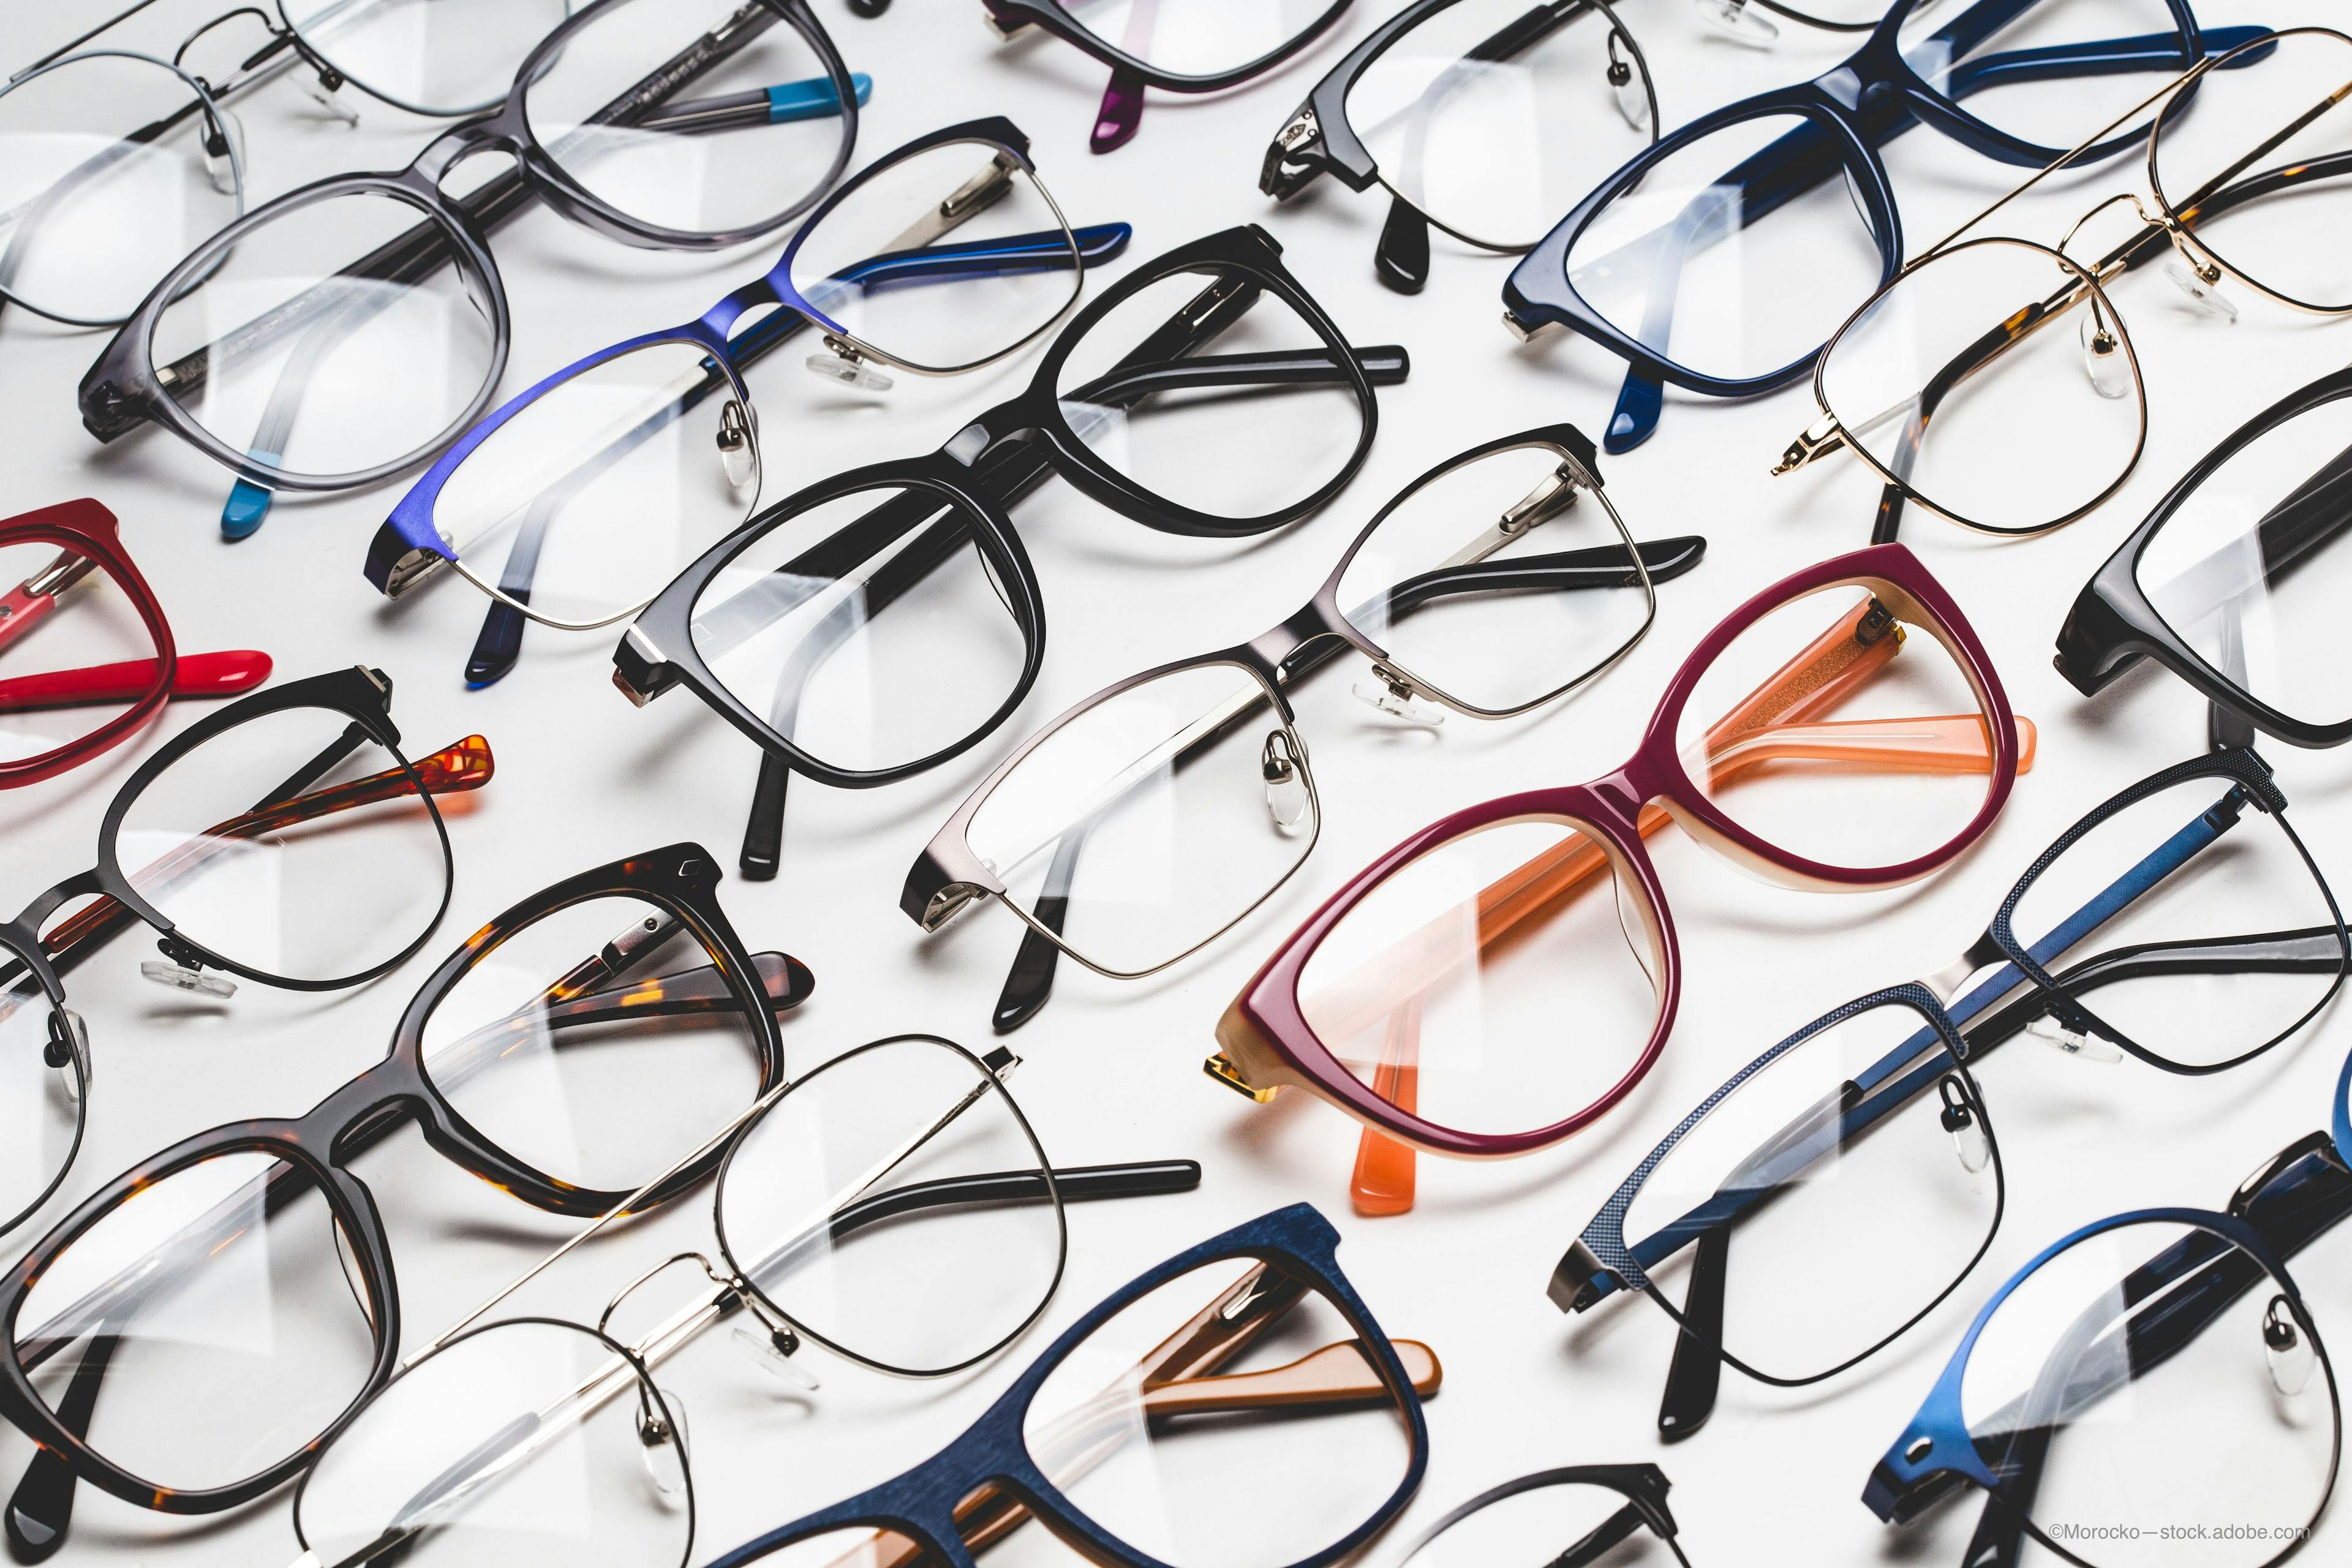 eye glasses year in review for optometry - Image credit: Adobe Stock / Morocko